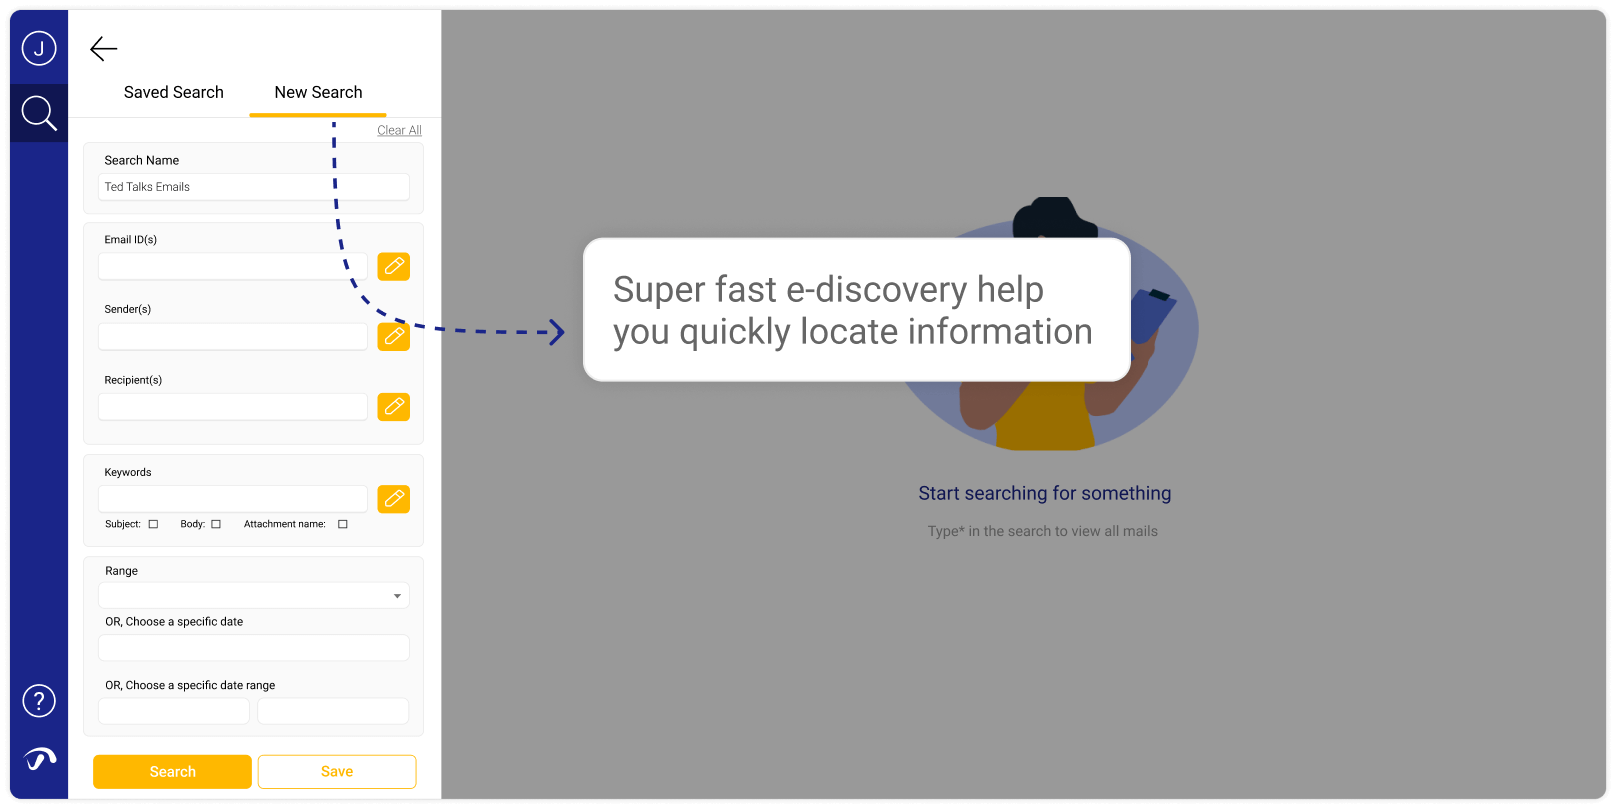 Super fast e-discovery help you quickly locate information.